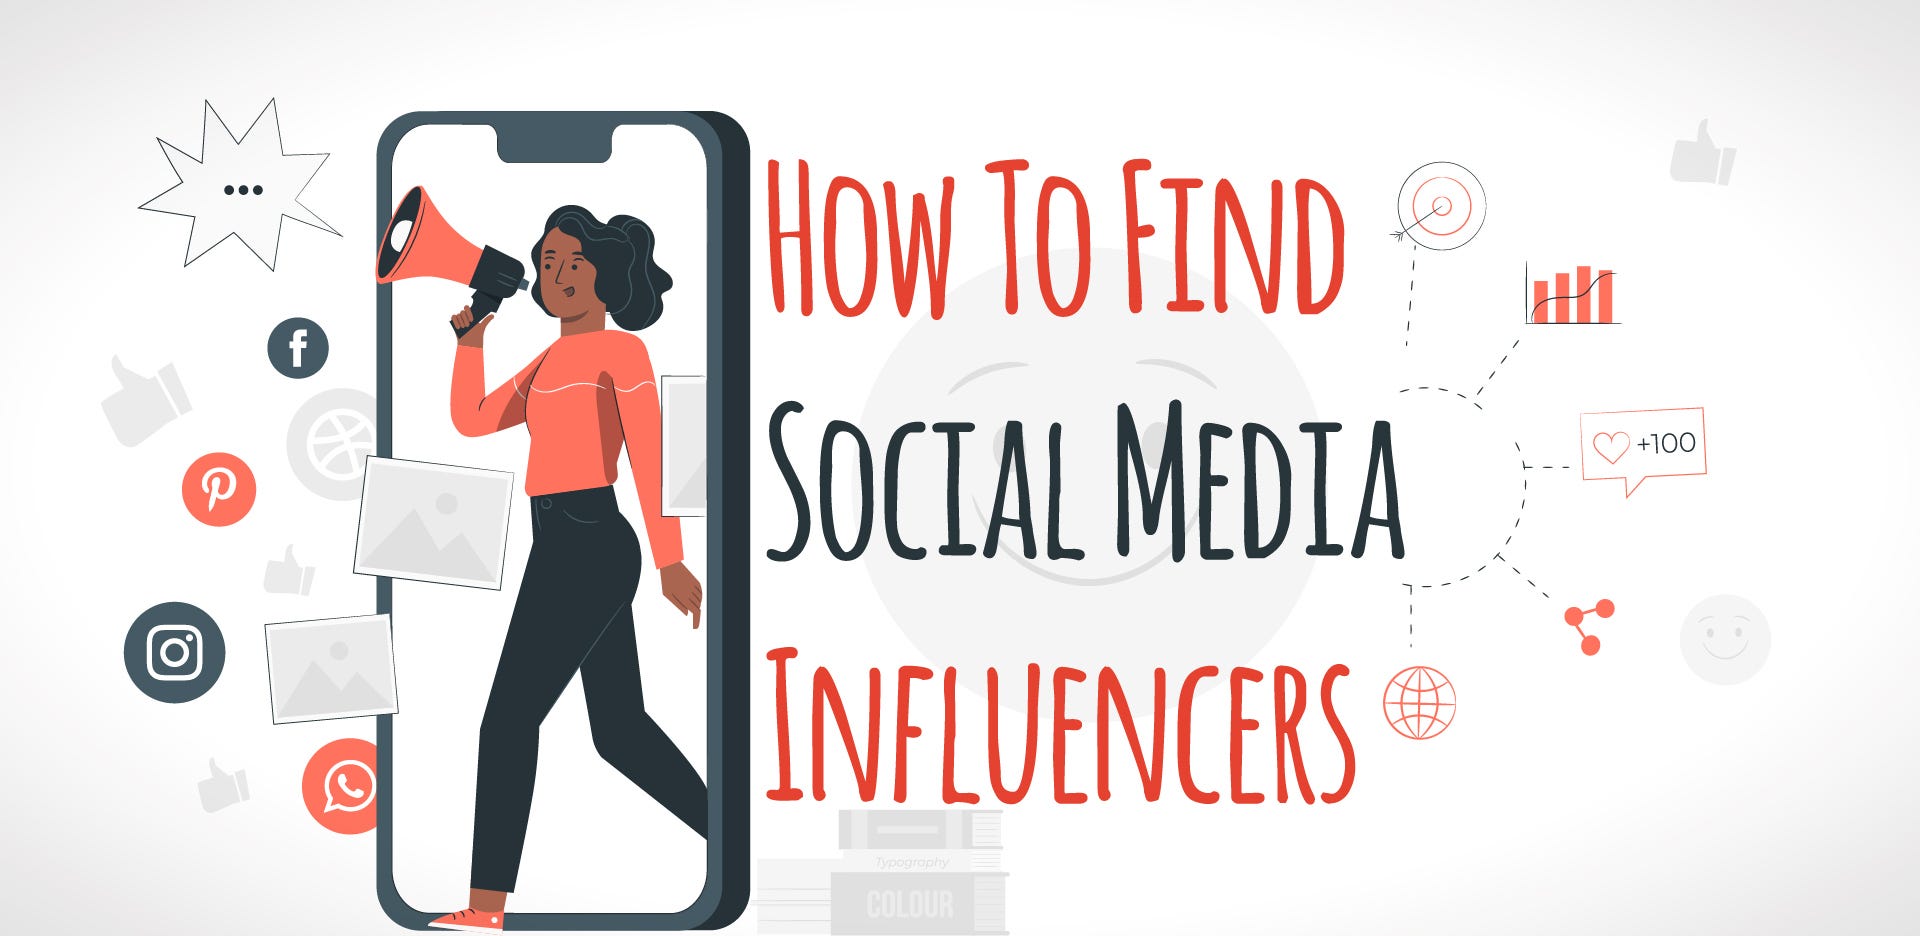 How To Find Social Media Influencers